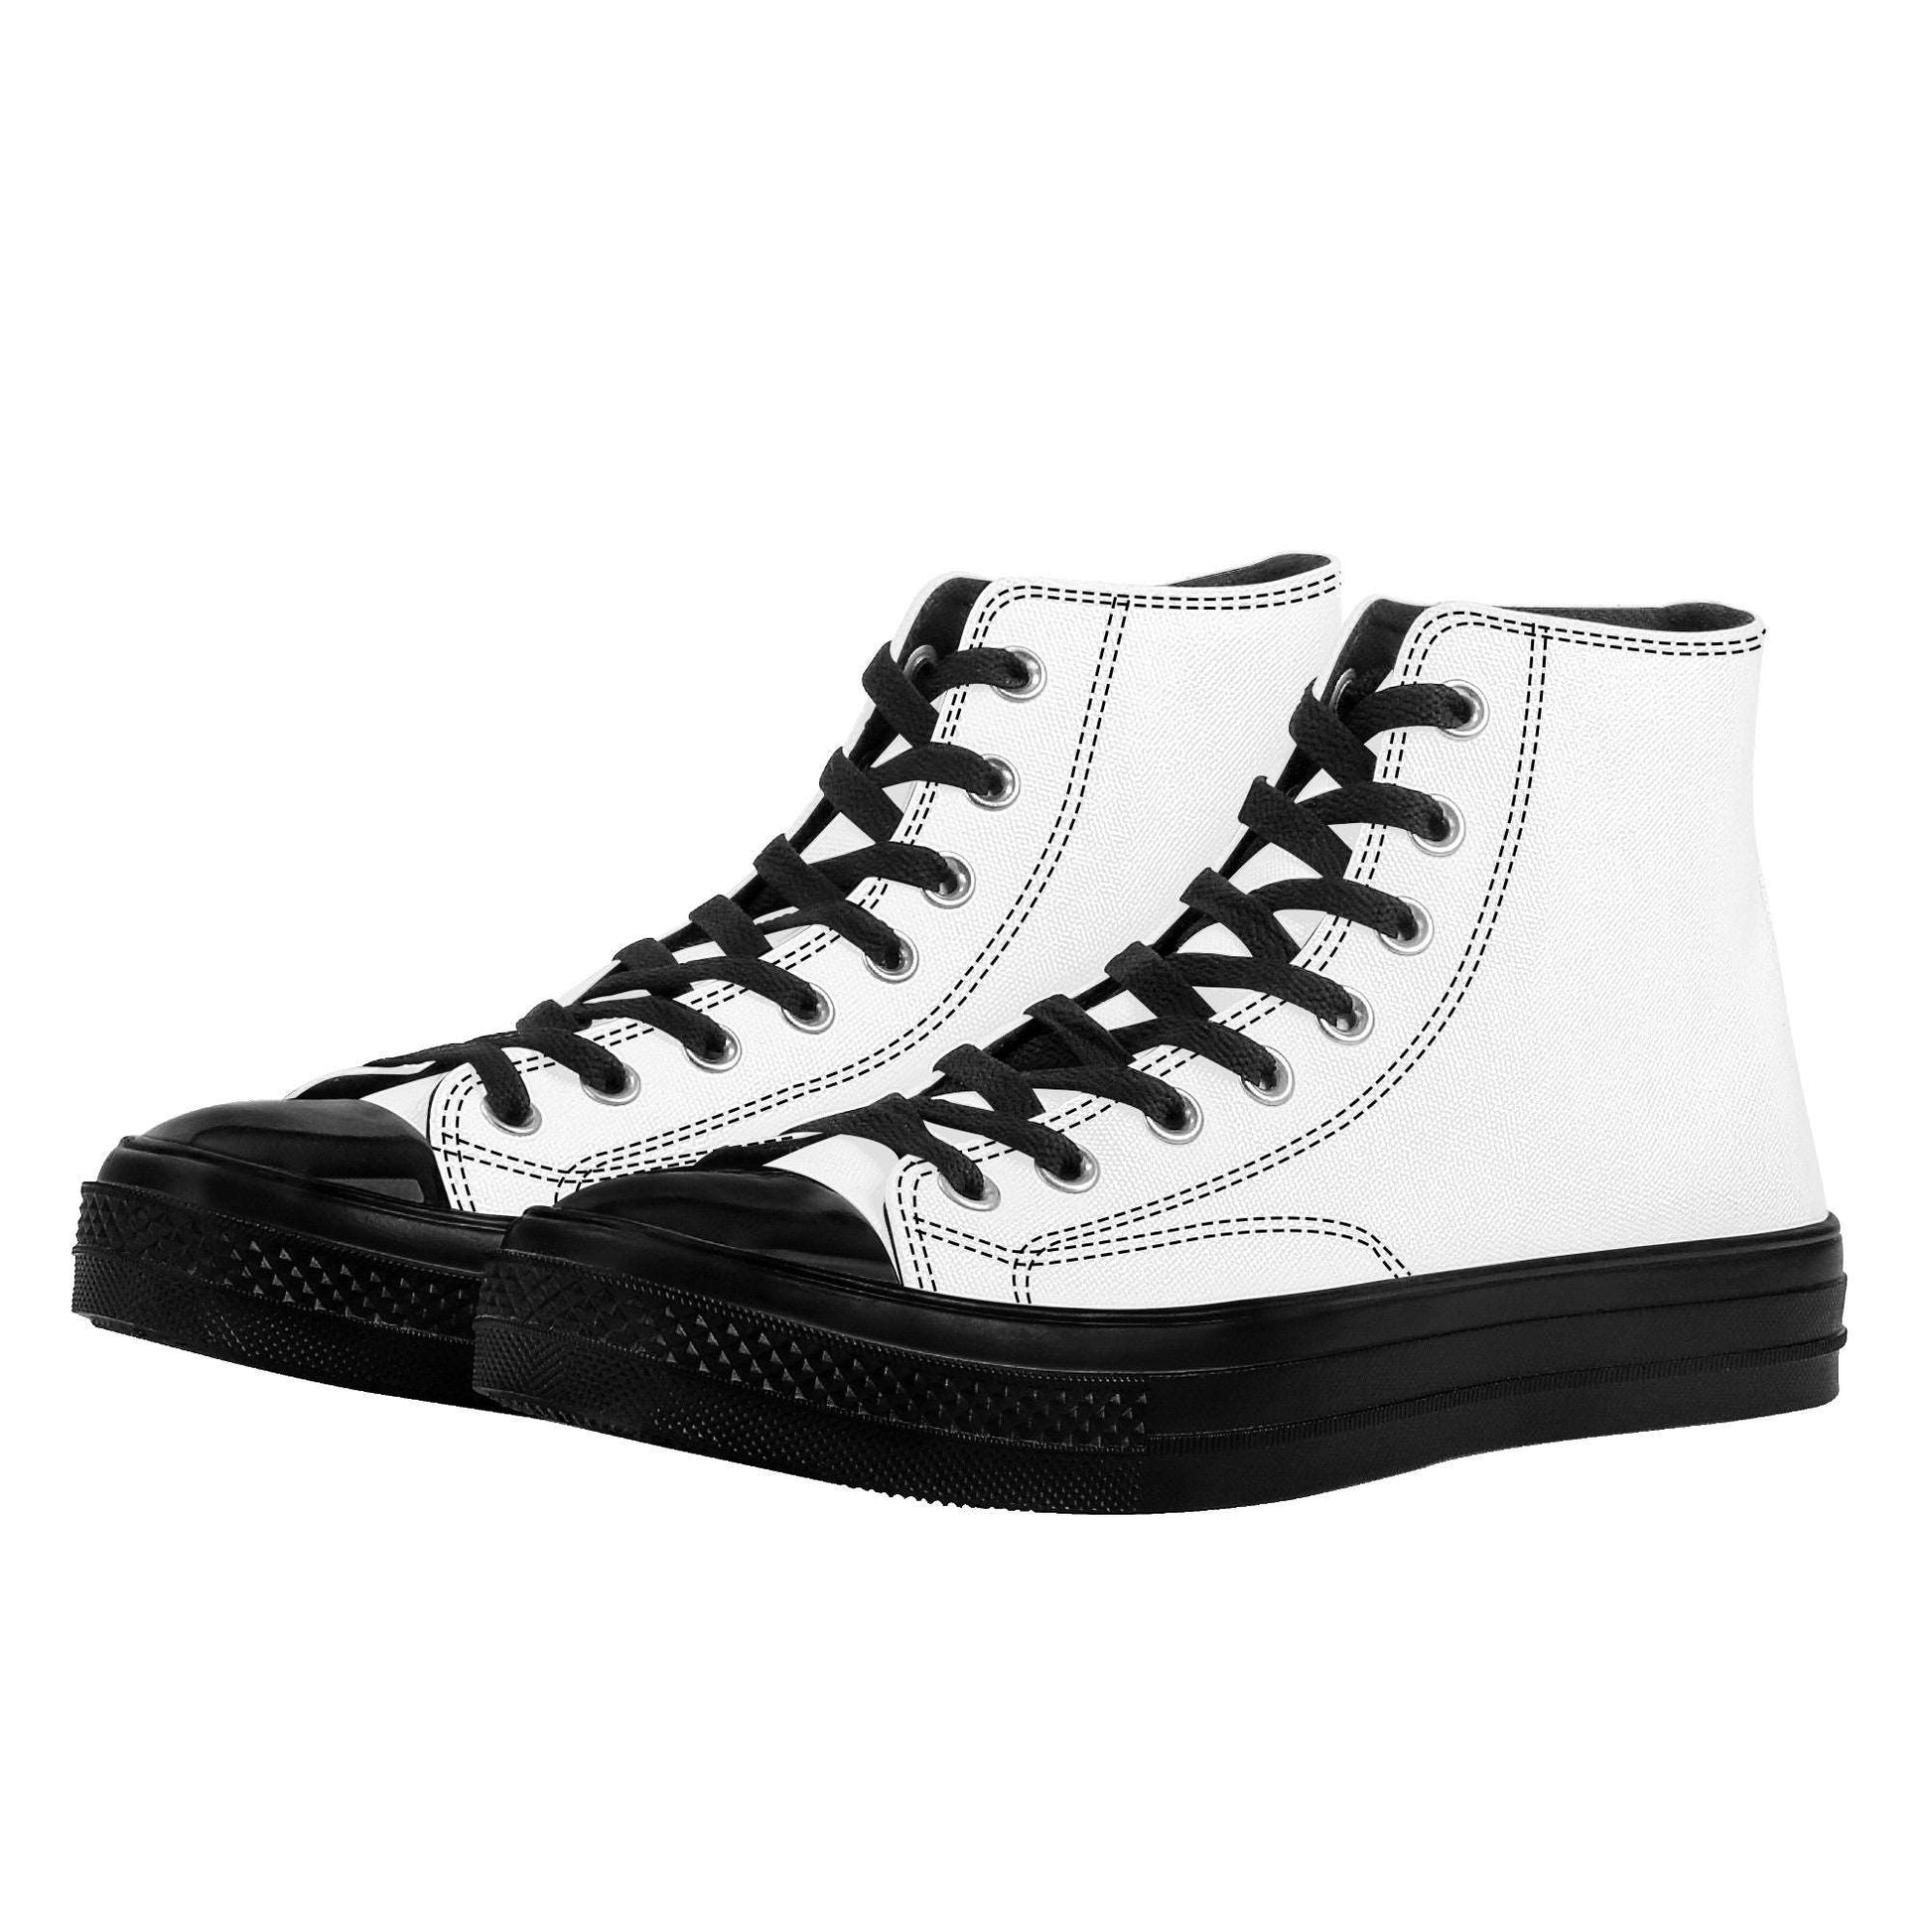 Create Your Own - High Top Canvas Shoes - Black